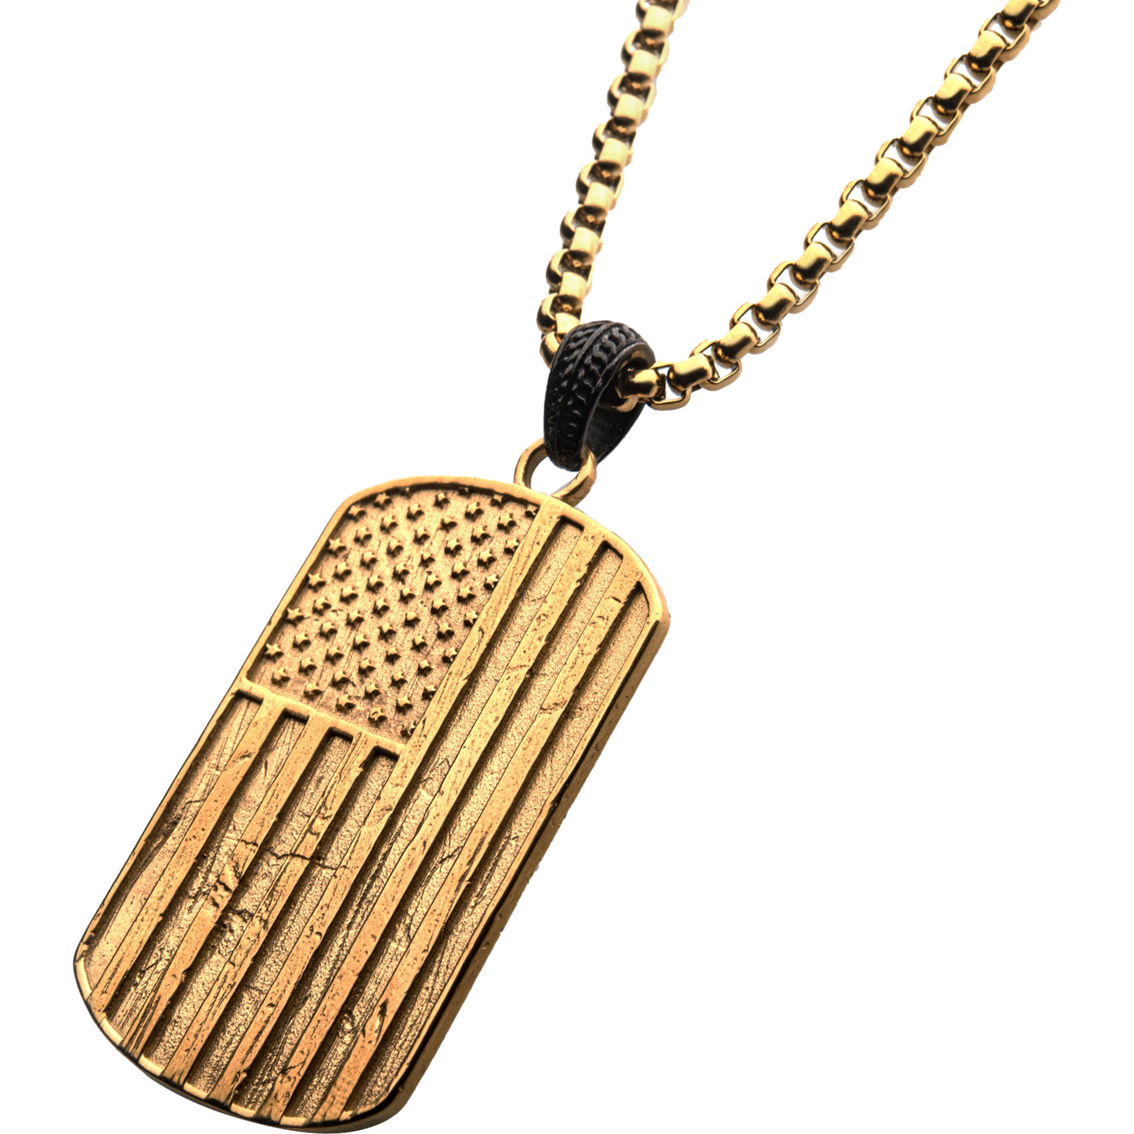 Inox 18K Gold Over Stainless Steel Rugged American Flag Pendant Necklace - Image 2 of 2